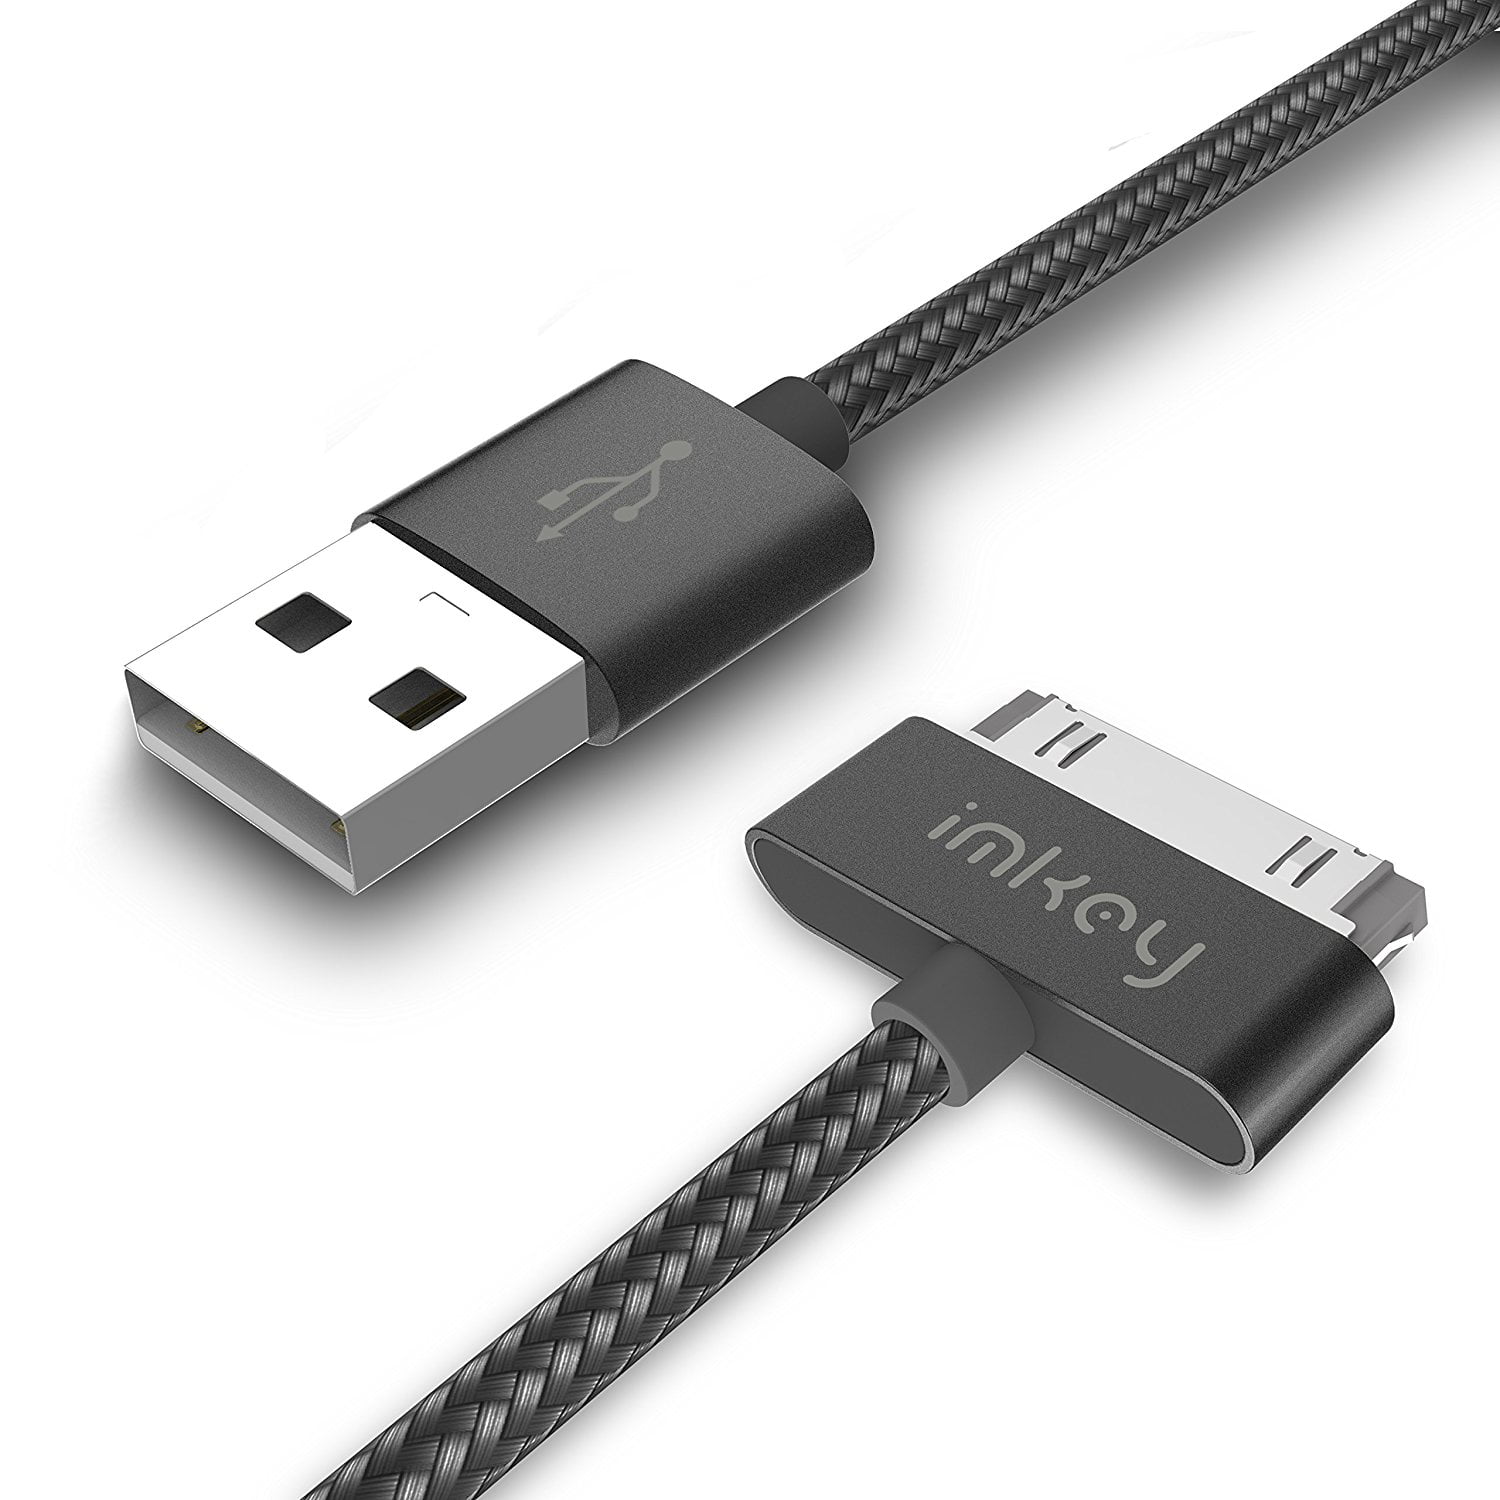 IMKEY Premium 6.5 Feet Tangle-Free Braided USB to 30 Pin Sync Data Fast Charging Cable for Samsung-Galaxy Tab 2 10.1 7.0 7.7 8.9 Samsung Galaxy Tab Cable Gray 